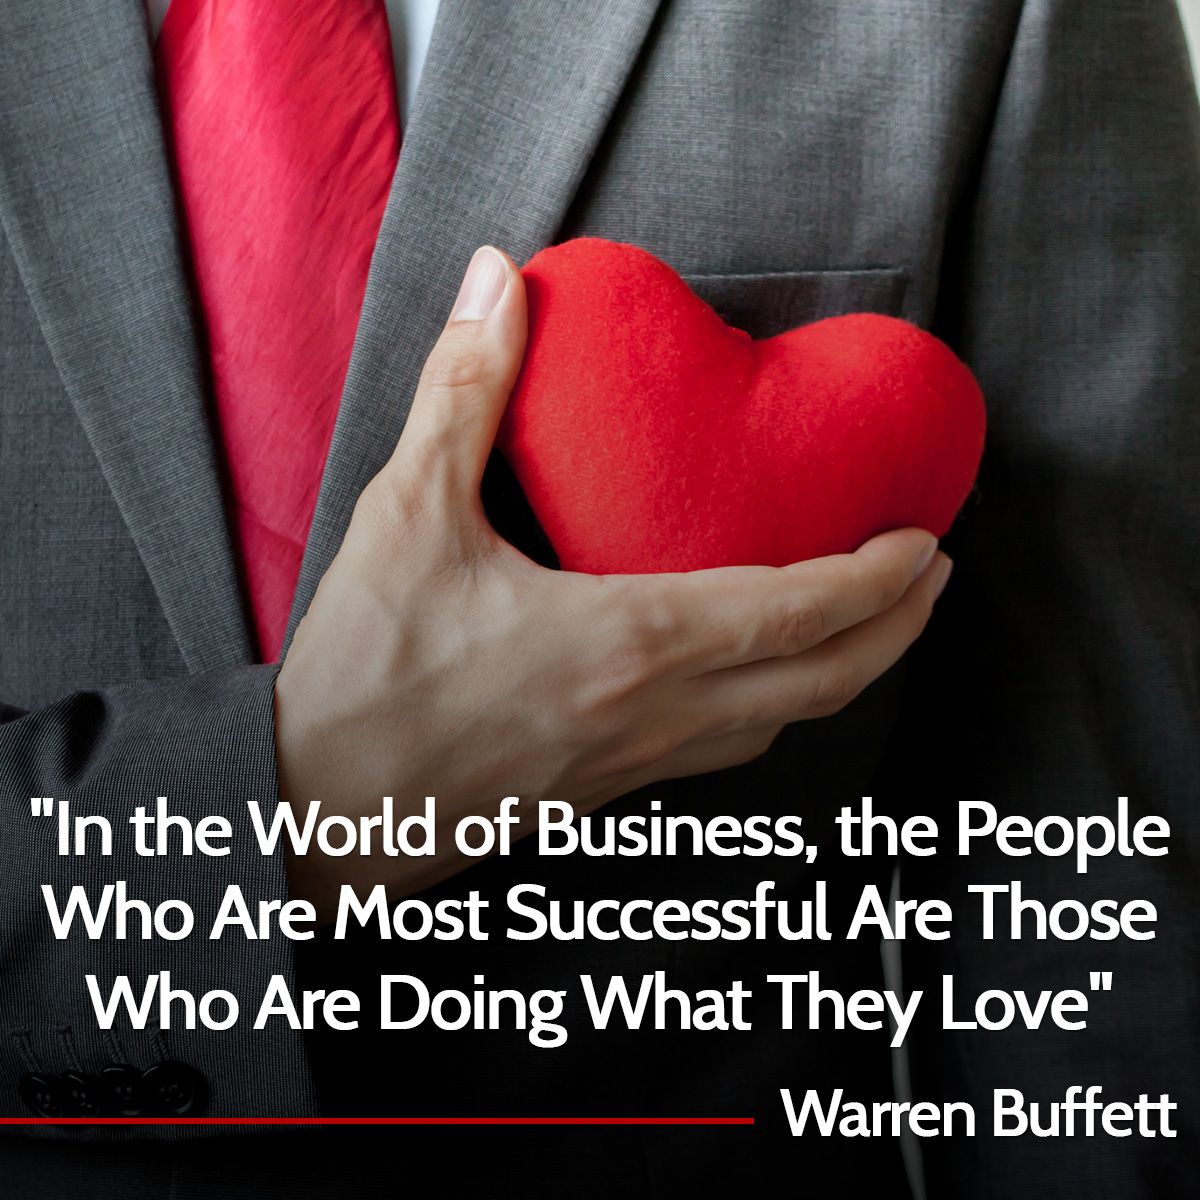 In the World of Business, the People Who Are Most Successful Are Those Who Are Doing What They Love